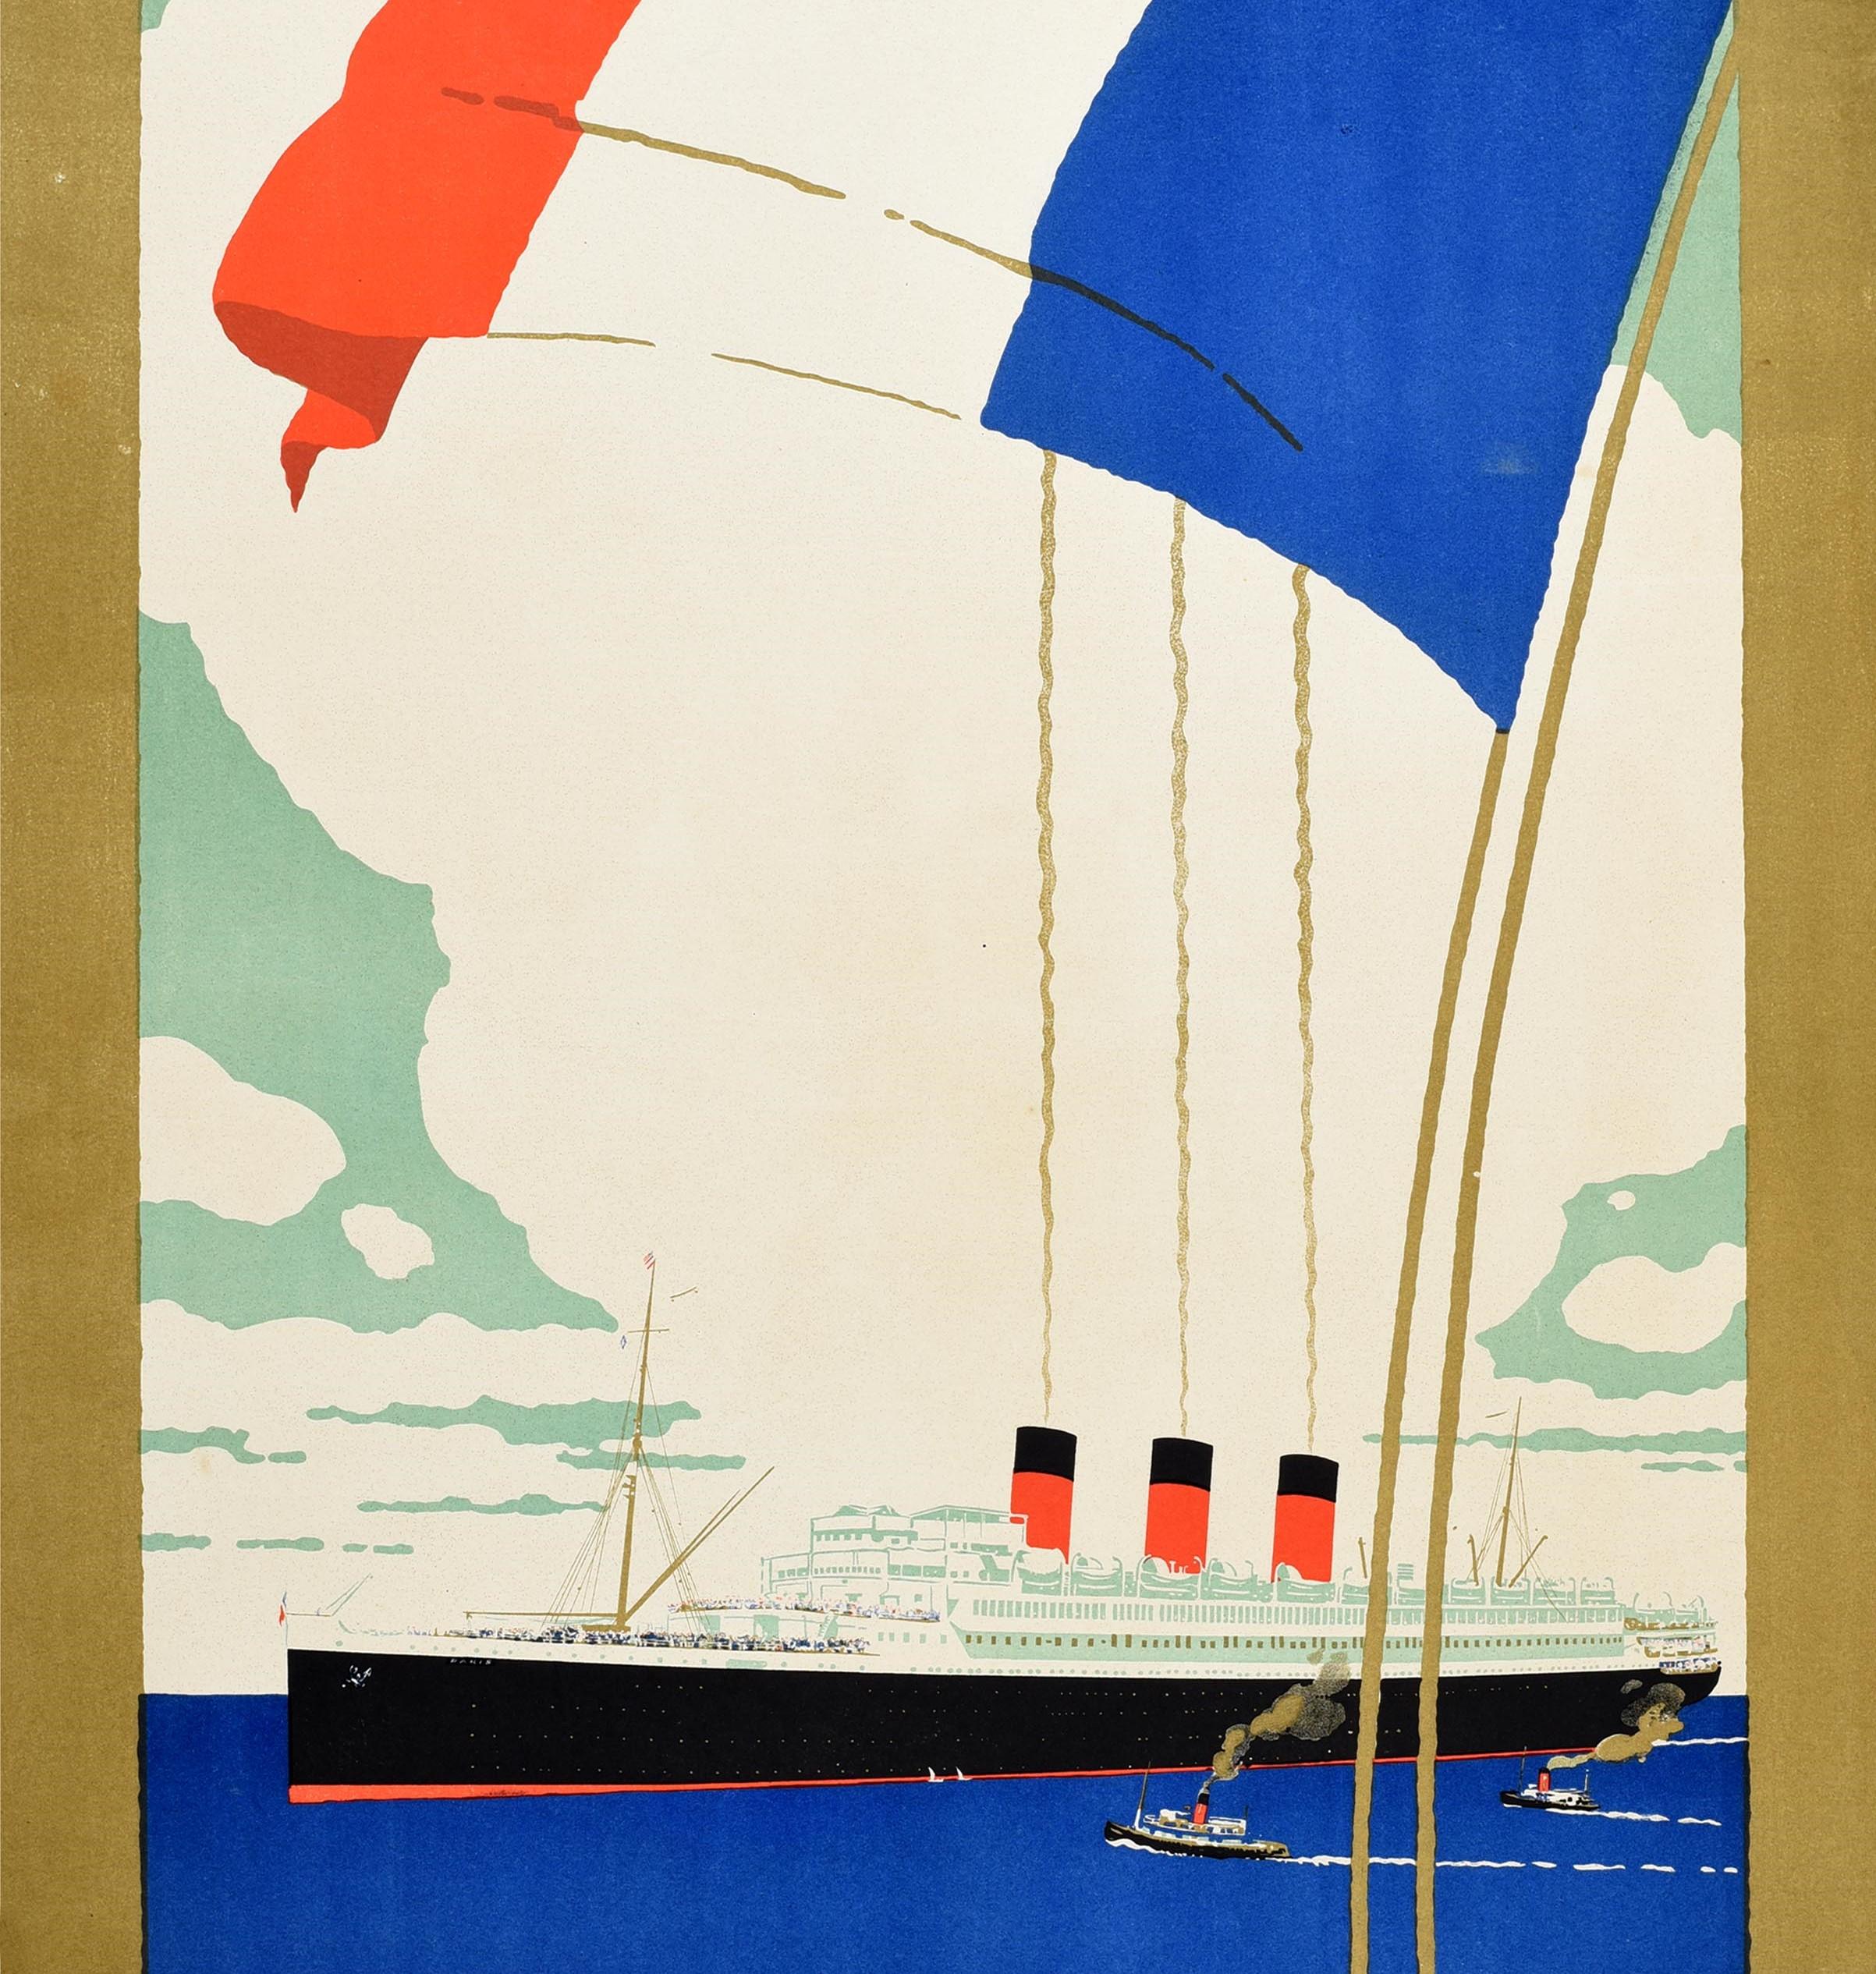 Original Vintage Travel Poster French Line Cruise Ship Plymouth New York Steamer - Art Deco Print by Unknown